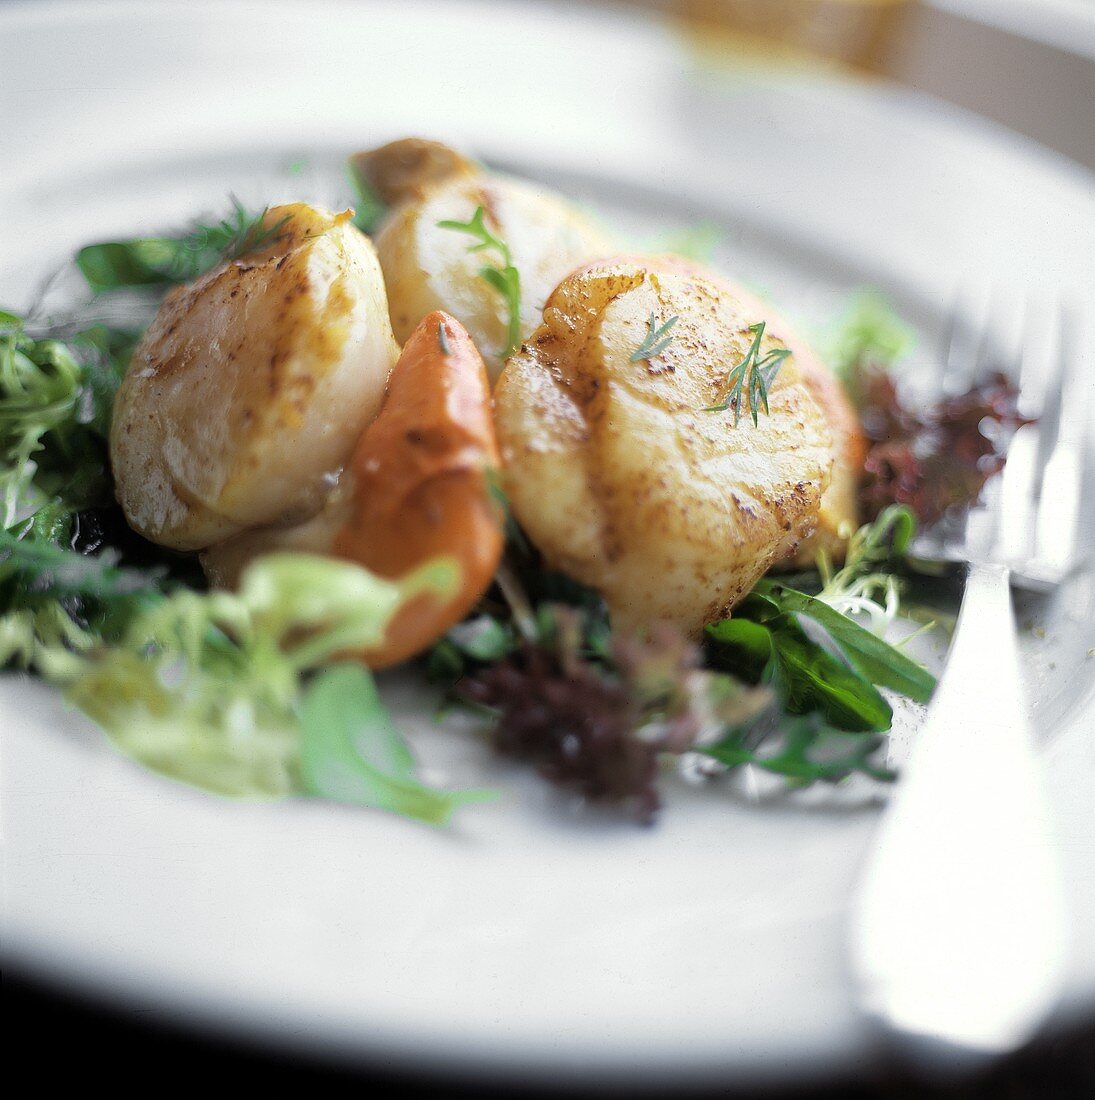 Broiled Scallops on a Bed of Mixed Greens